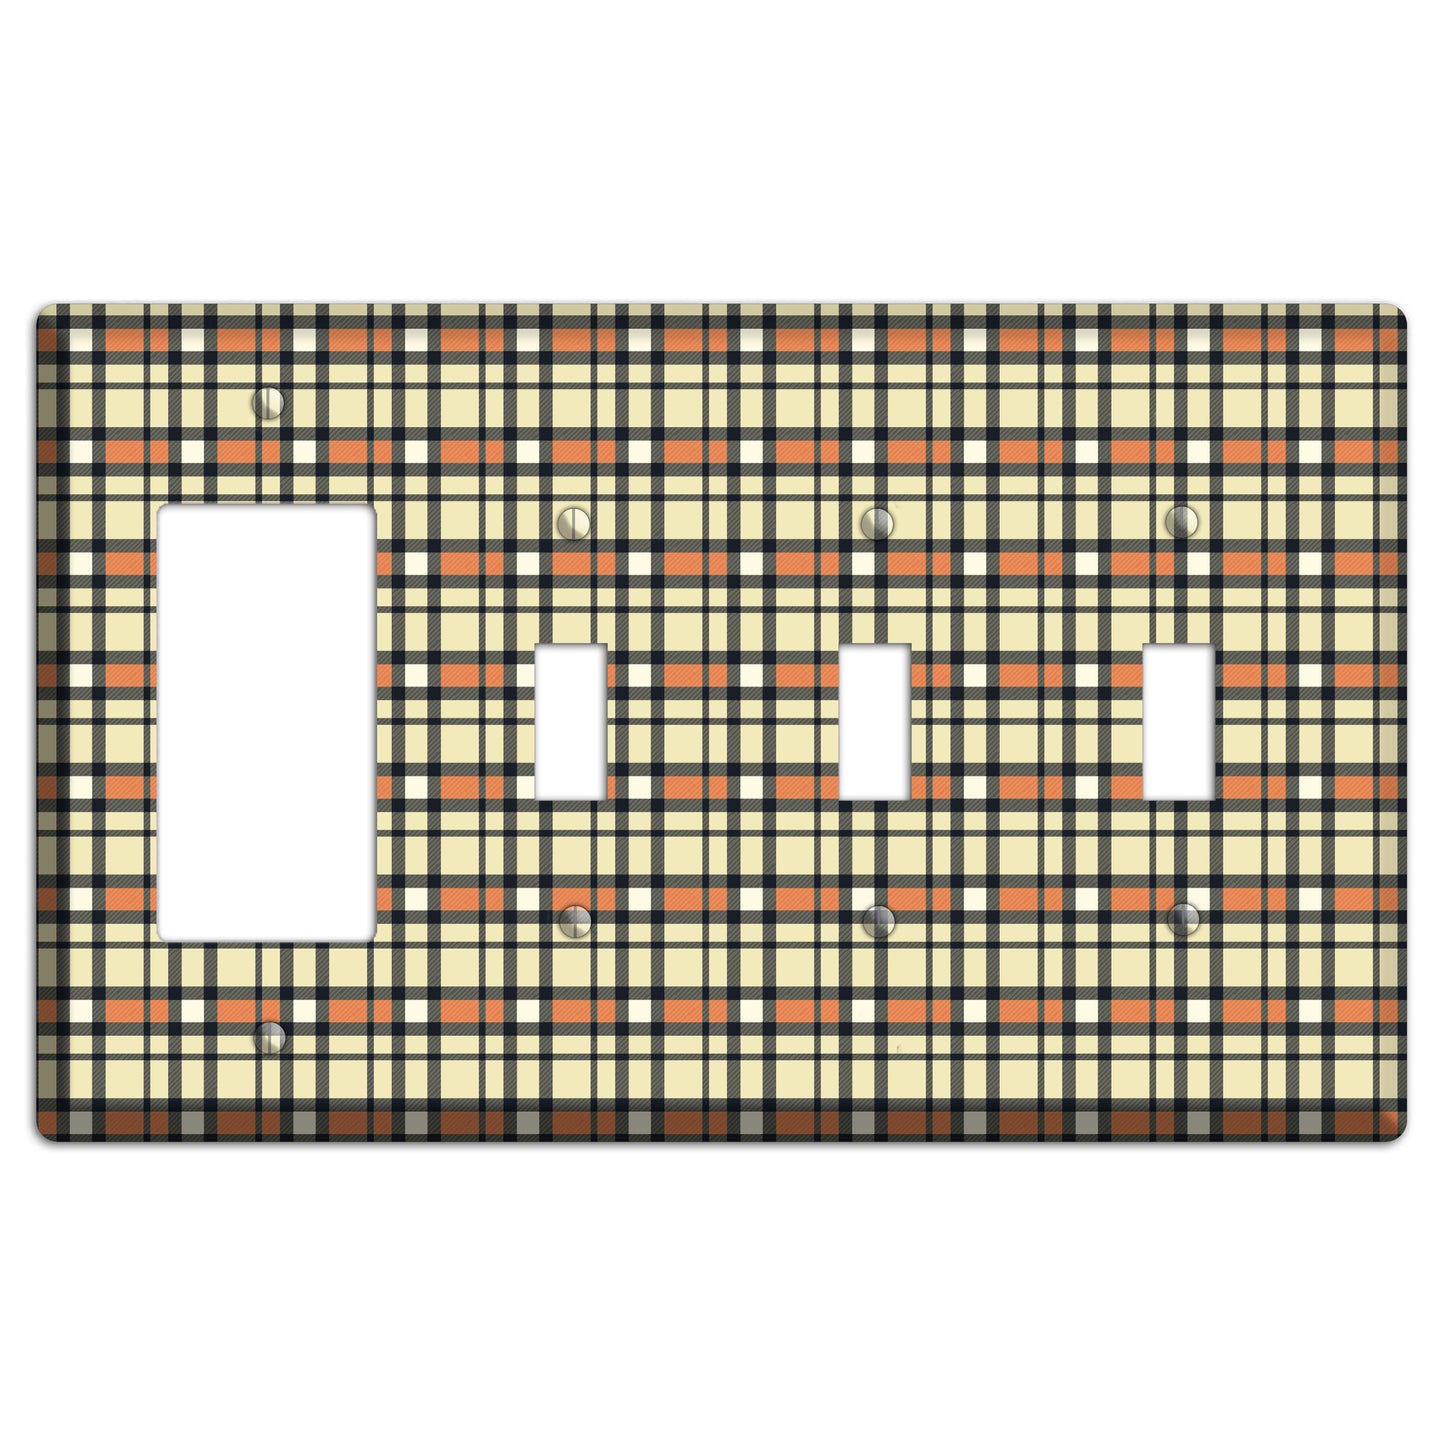 Beige and Brown Plaid Rocker / 3 Toggle Wallplate